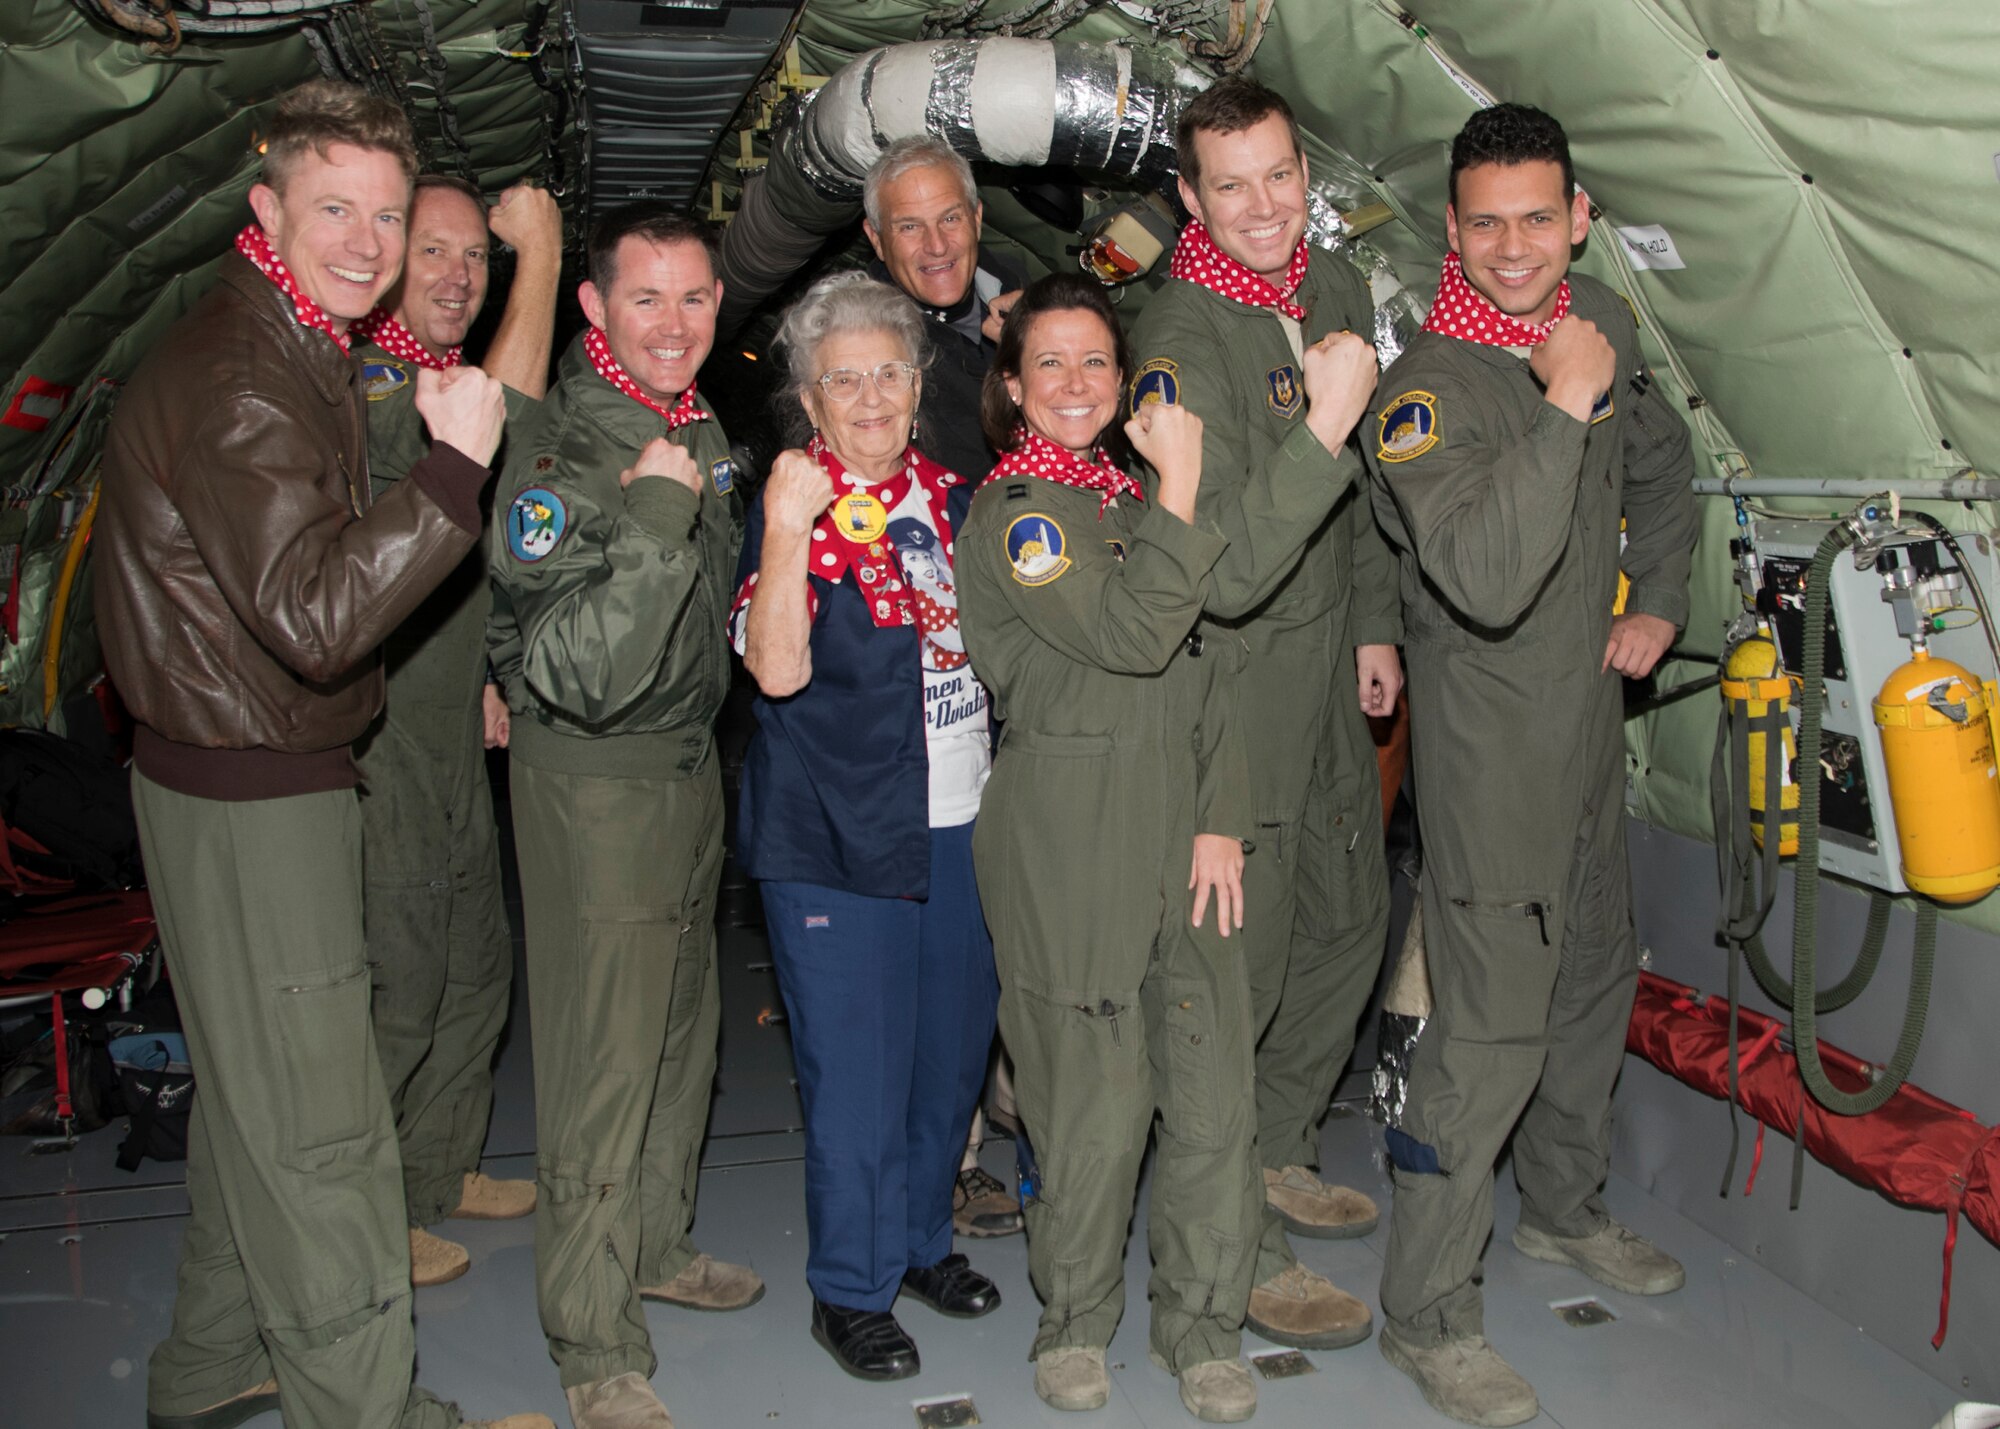 Mae Krier “Rosie the Riveter” poses for a photo with flight crew members from the 756th Air Refueling Squadron after returning from a refueling mission Oct. 22, 2019, at Joint Base Andrews, Md. Mae previously visited the wing where she met with Airmen, and returned for a flight on a KC-135 Stratotanker. Mae is also one of the original Rosie the Riveters from World War II. (U.S. Air Force photo/Staff Sgt. Cierra Presentado)